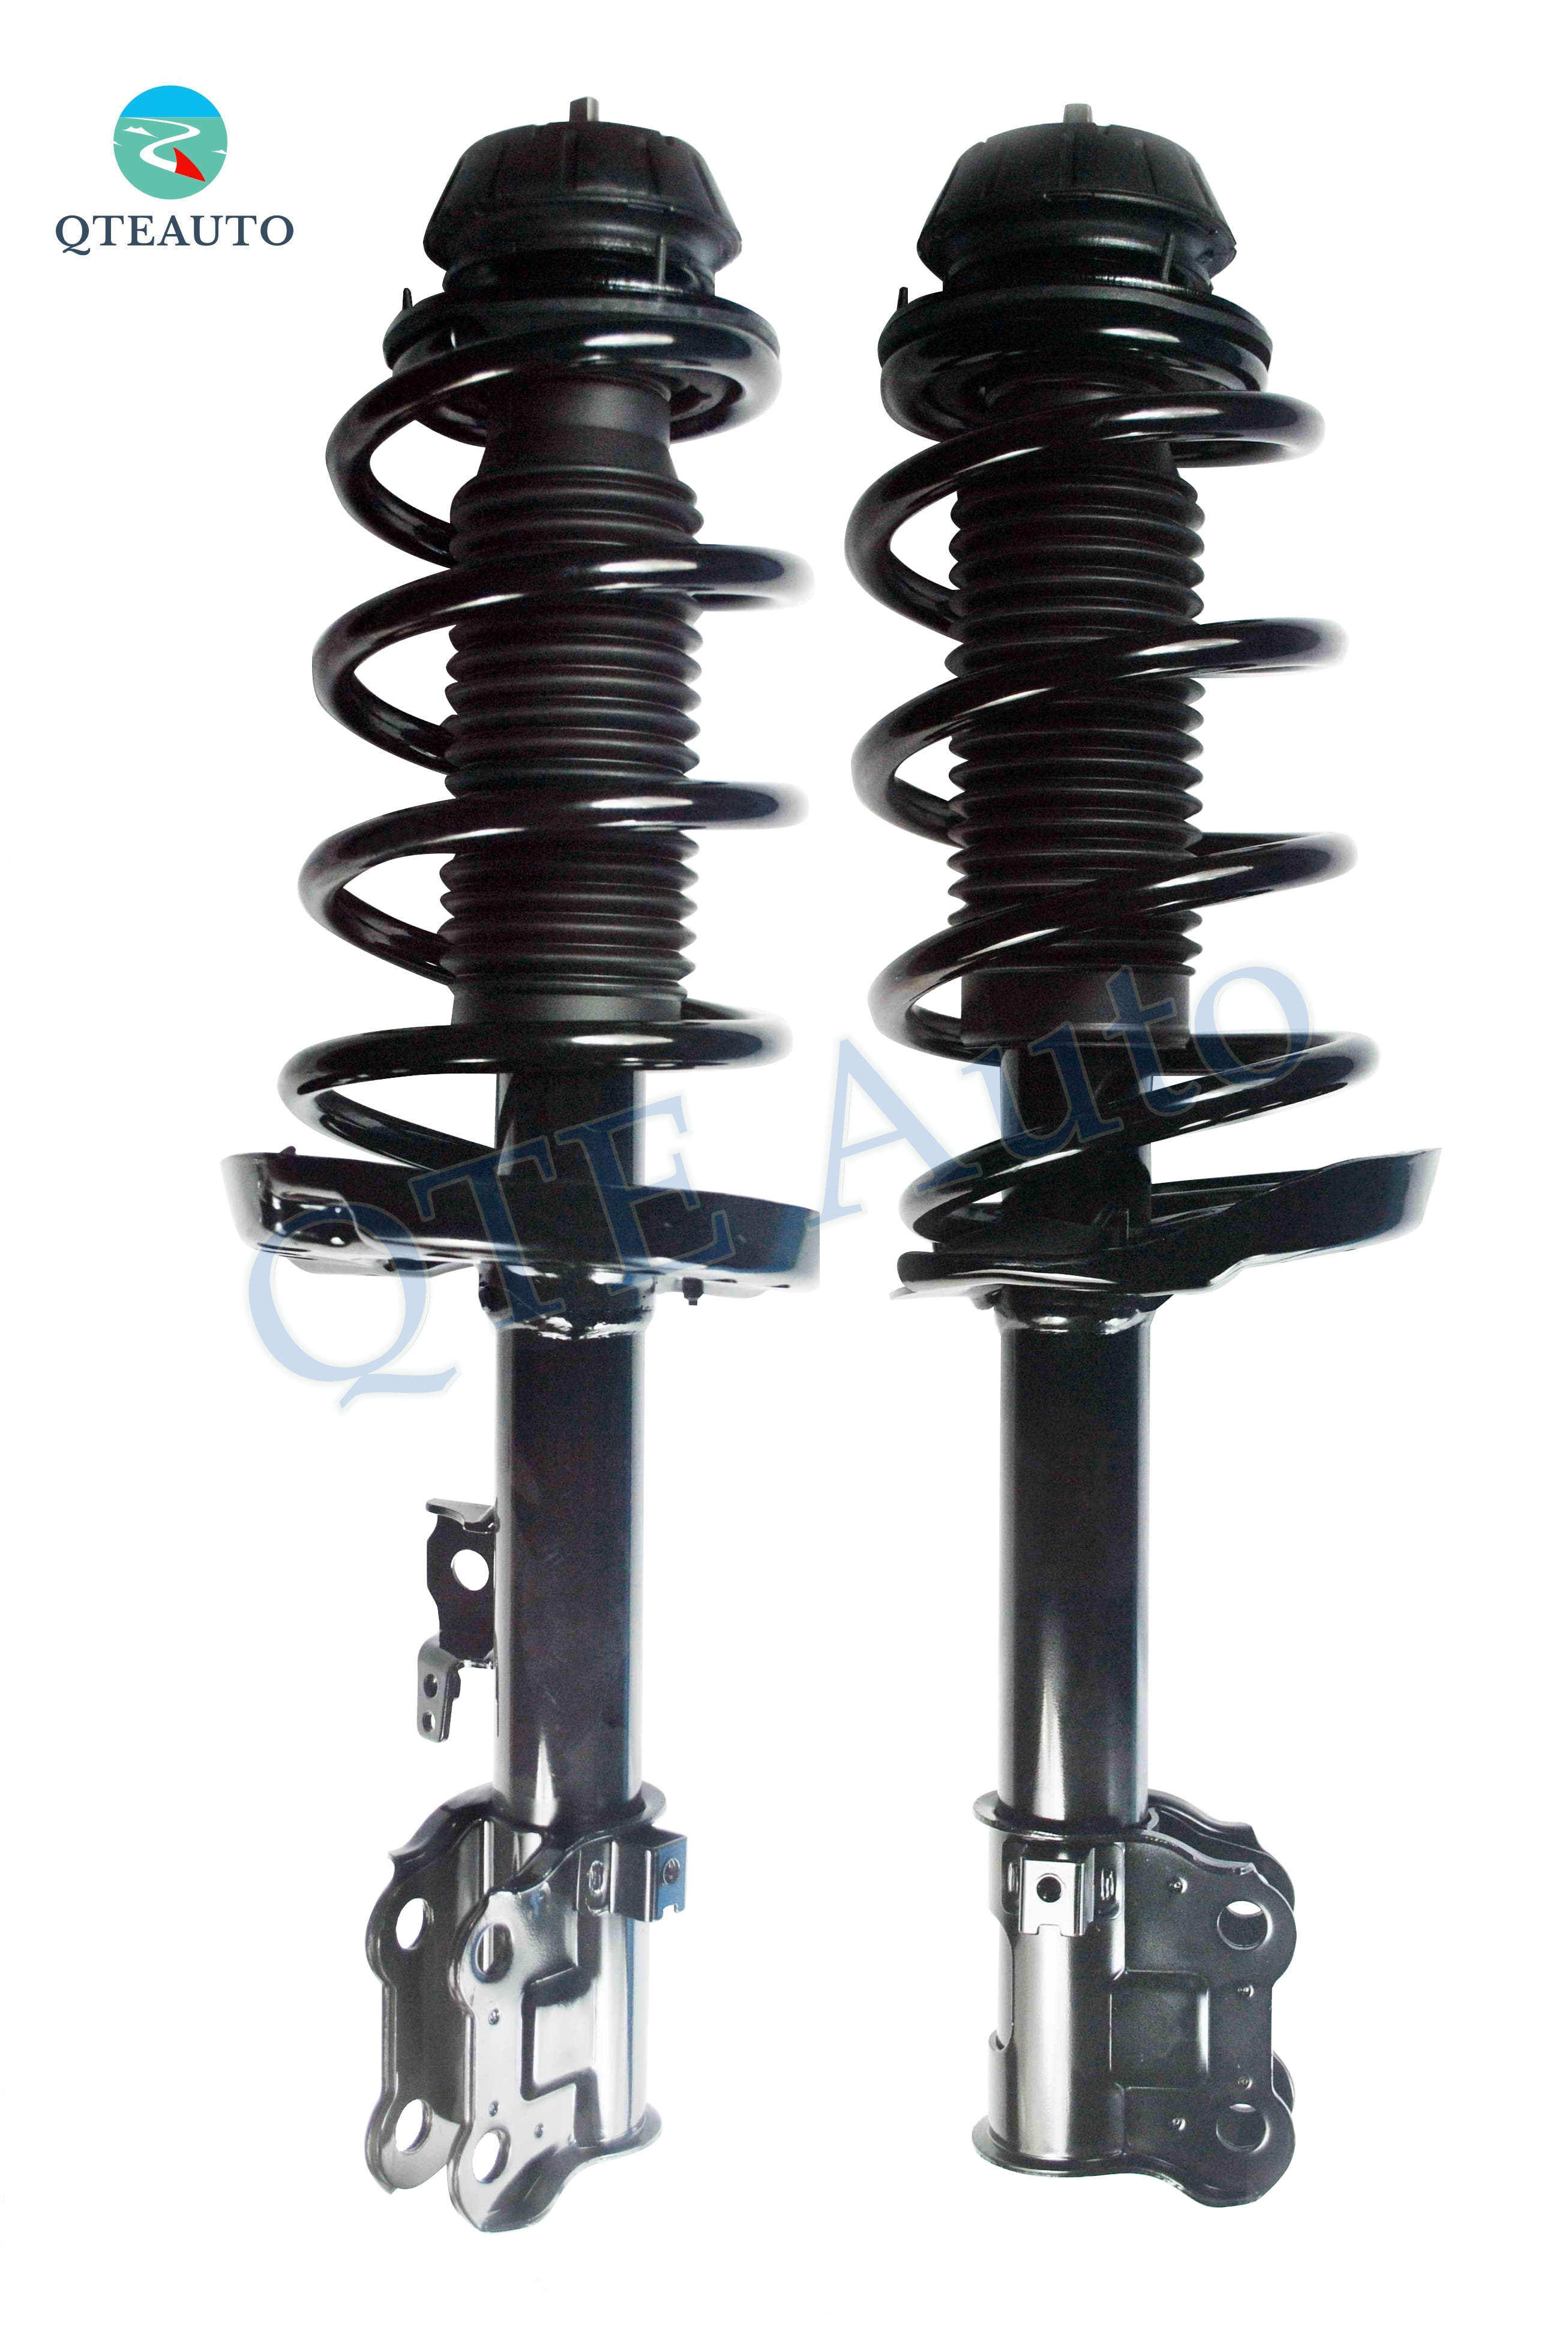 One Year Warranty 2012 for Kia Sorento Front Premium Quality Suspension Strut and Coil Spring Assemblies for Both Left and Right Sides